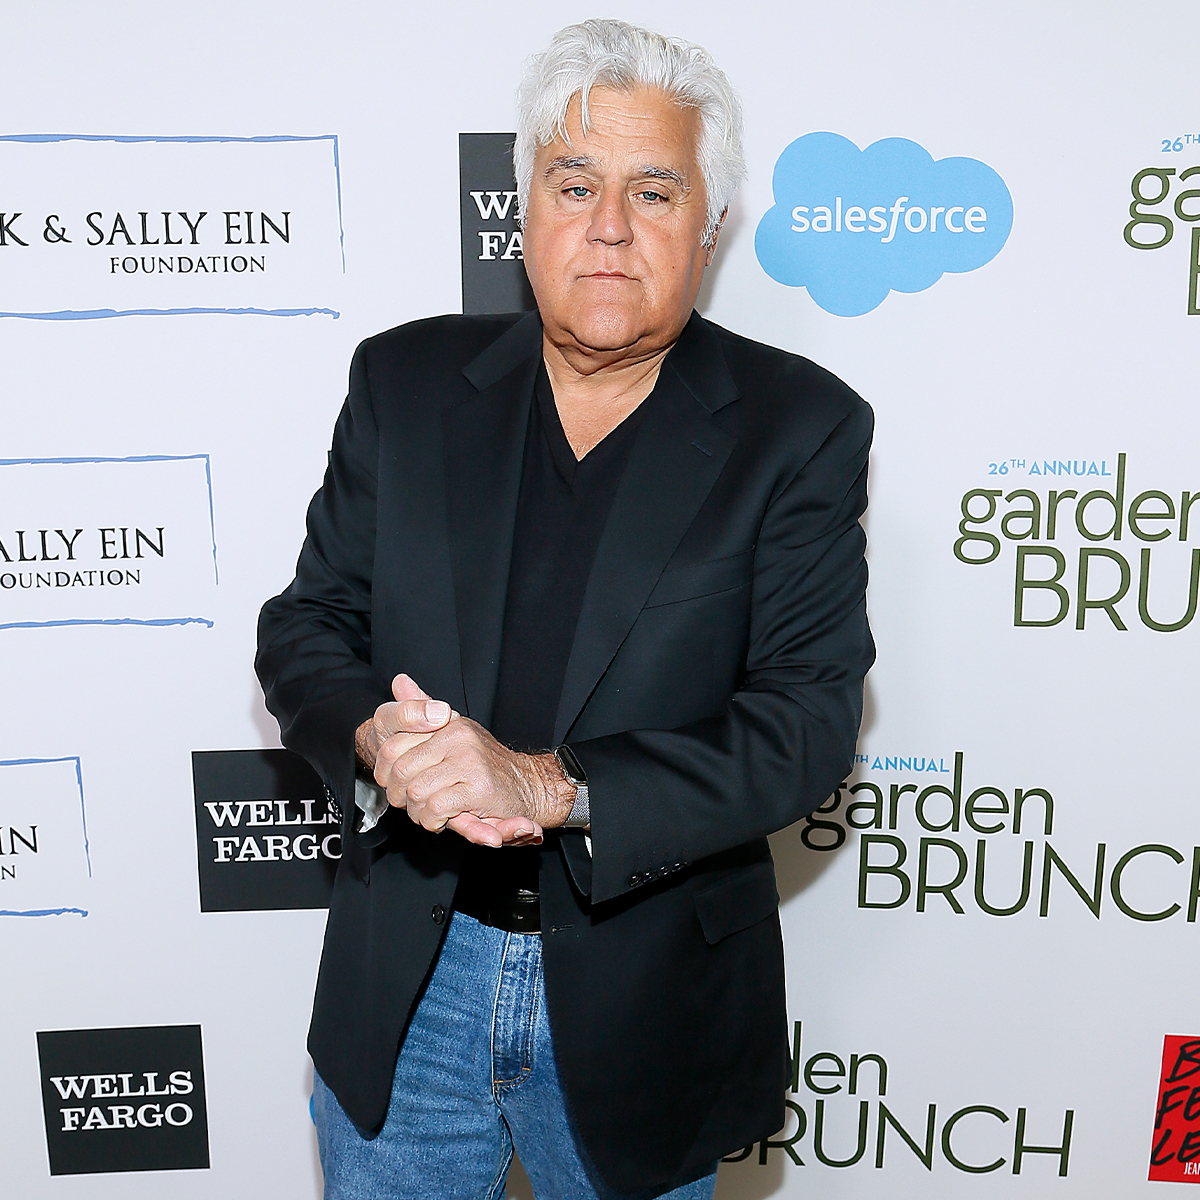 Jay Leno Rejects Idea That He “Deliberately Sabotaged” Conan O’Brien